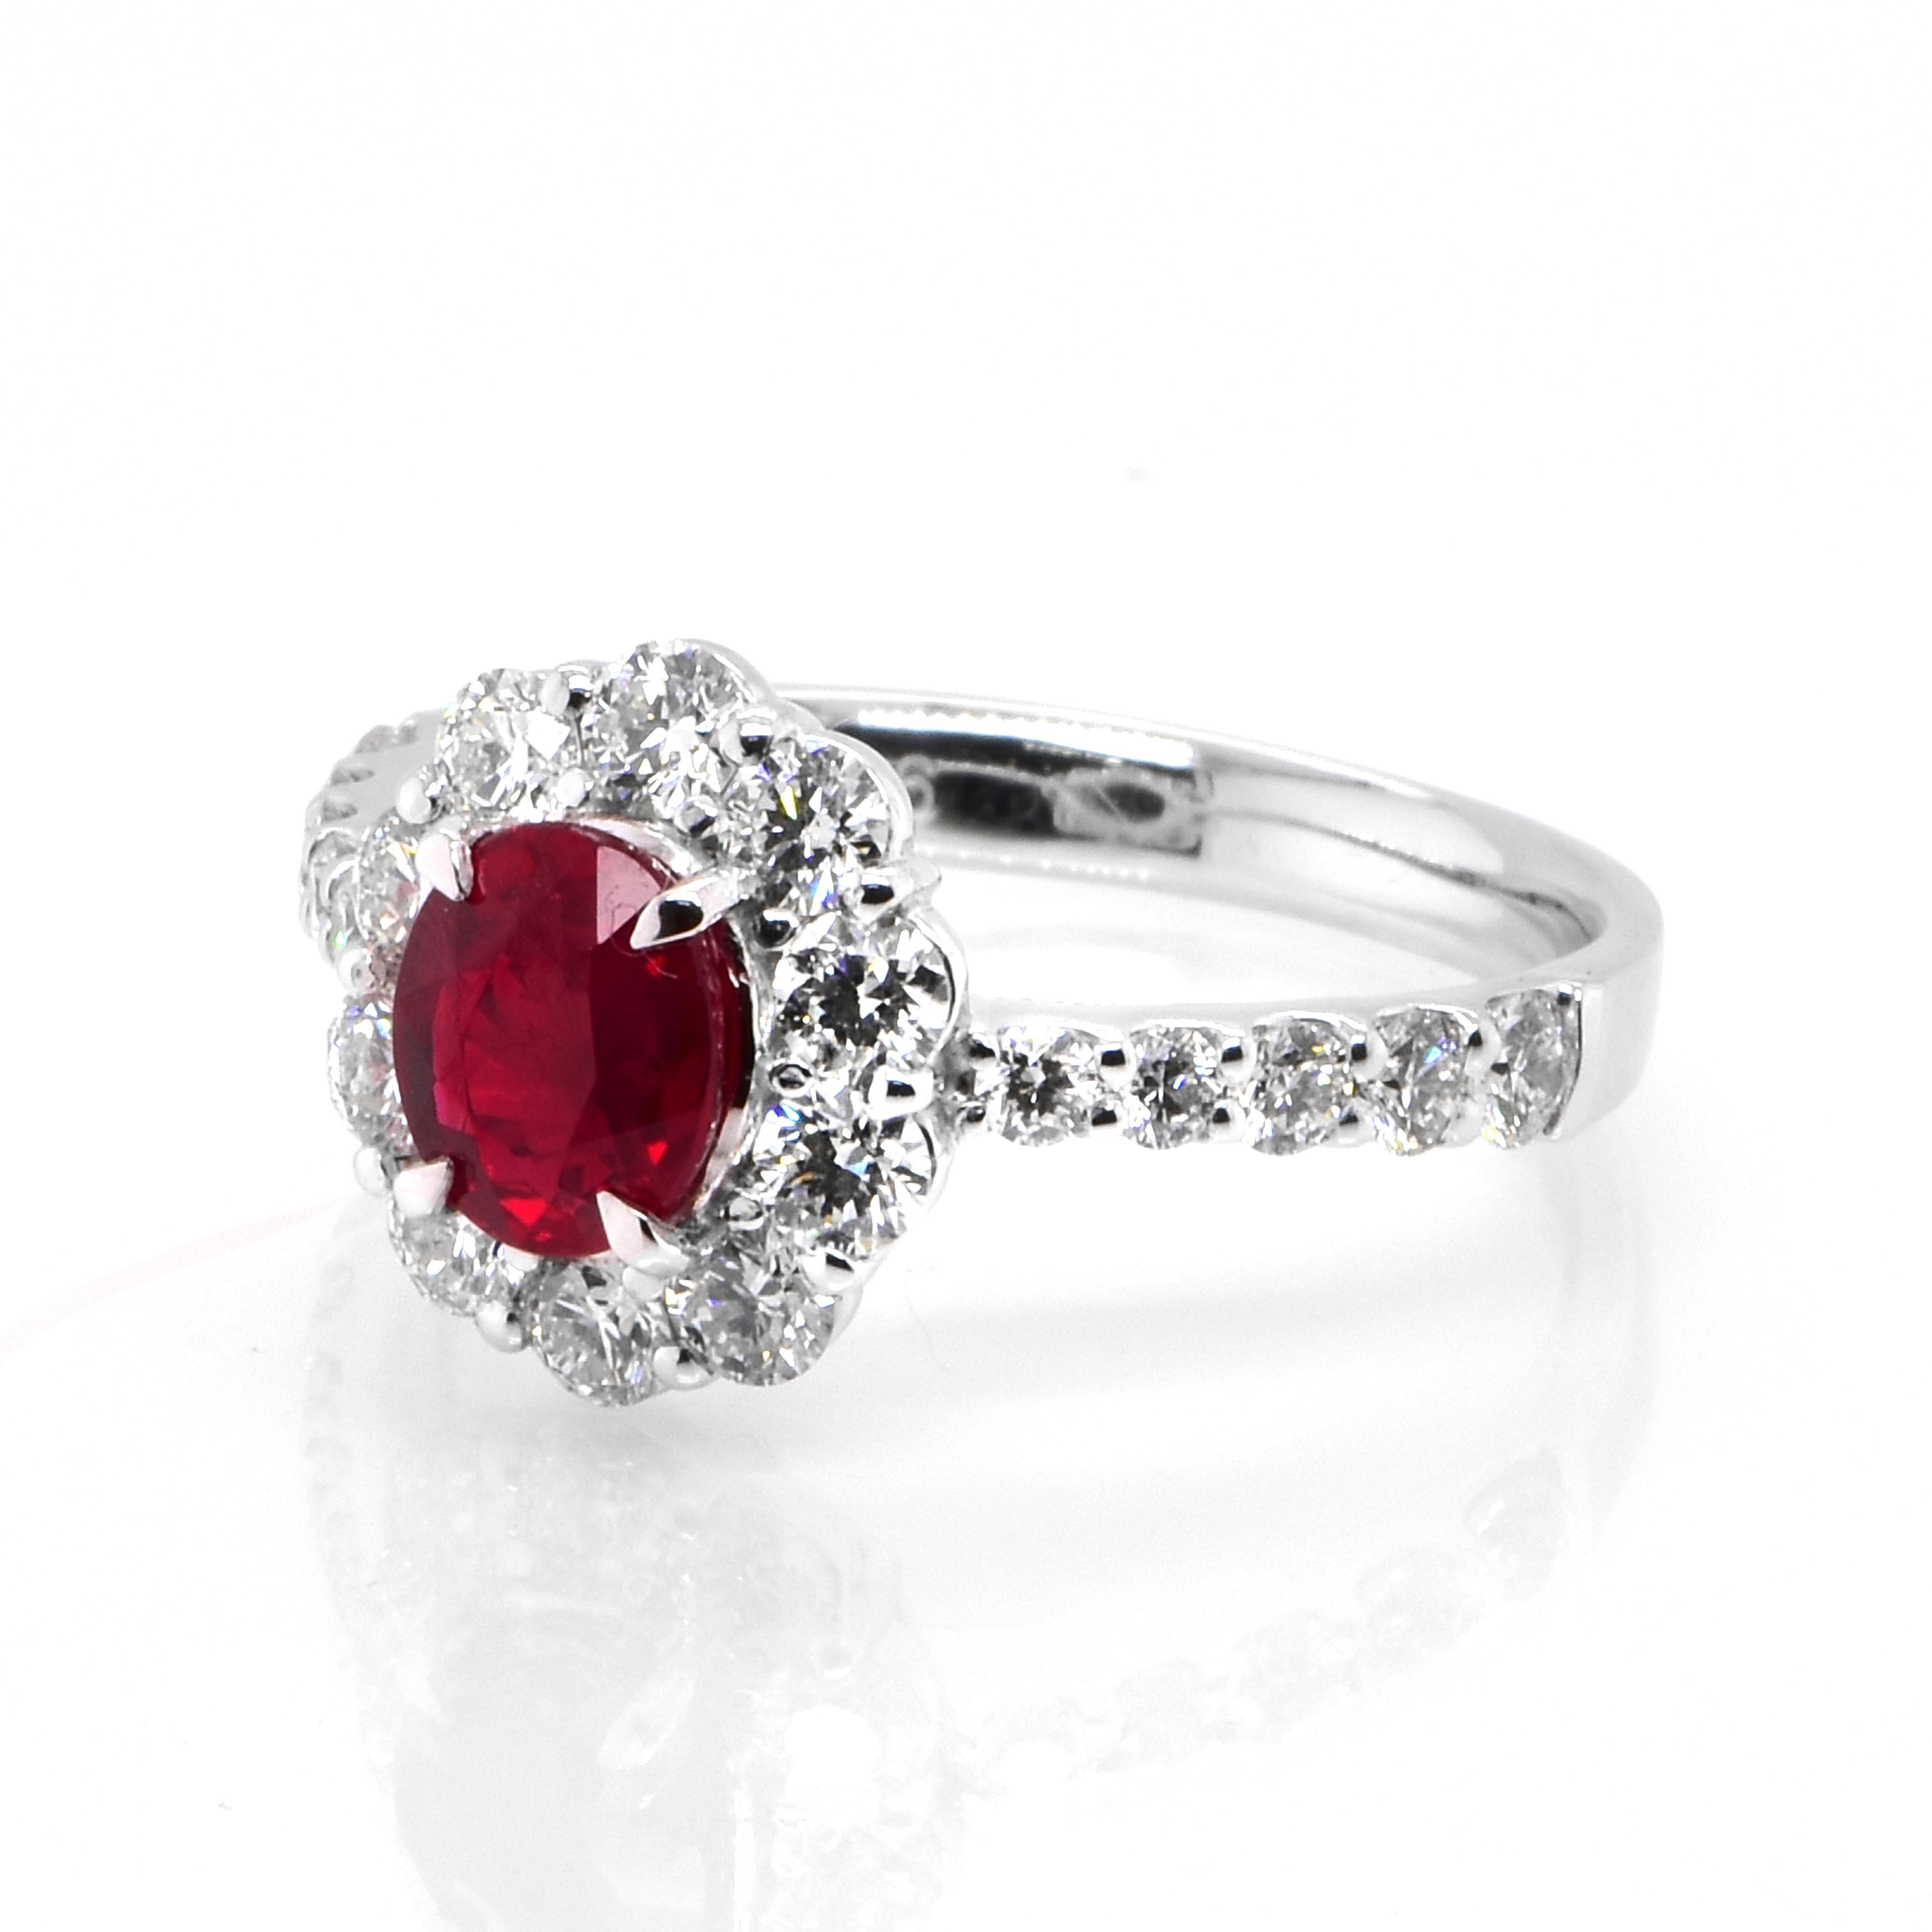 A beautiful Ring set in Platinum featuring a GIA Certified 1.00 Carat Natural, Pigeons Blood Red, Burmese Ruby and 0.96 Carat Diamonds. Rubies are referred to as 